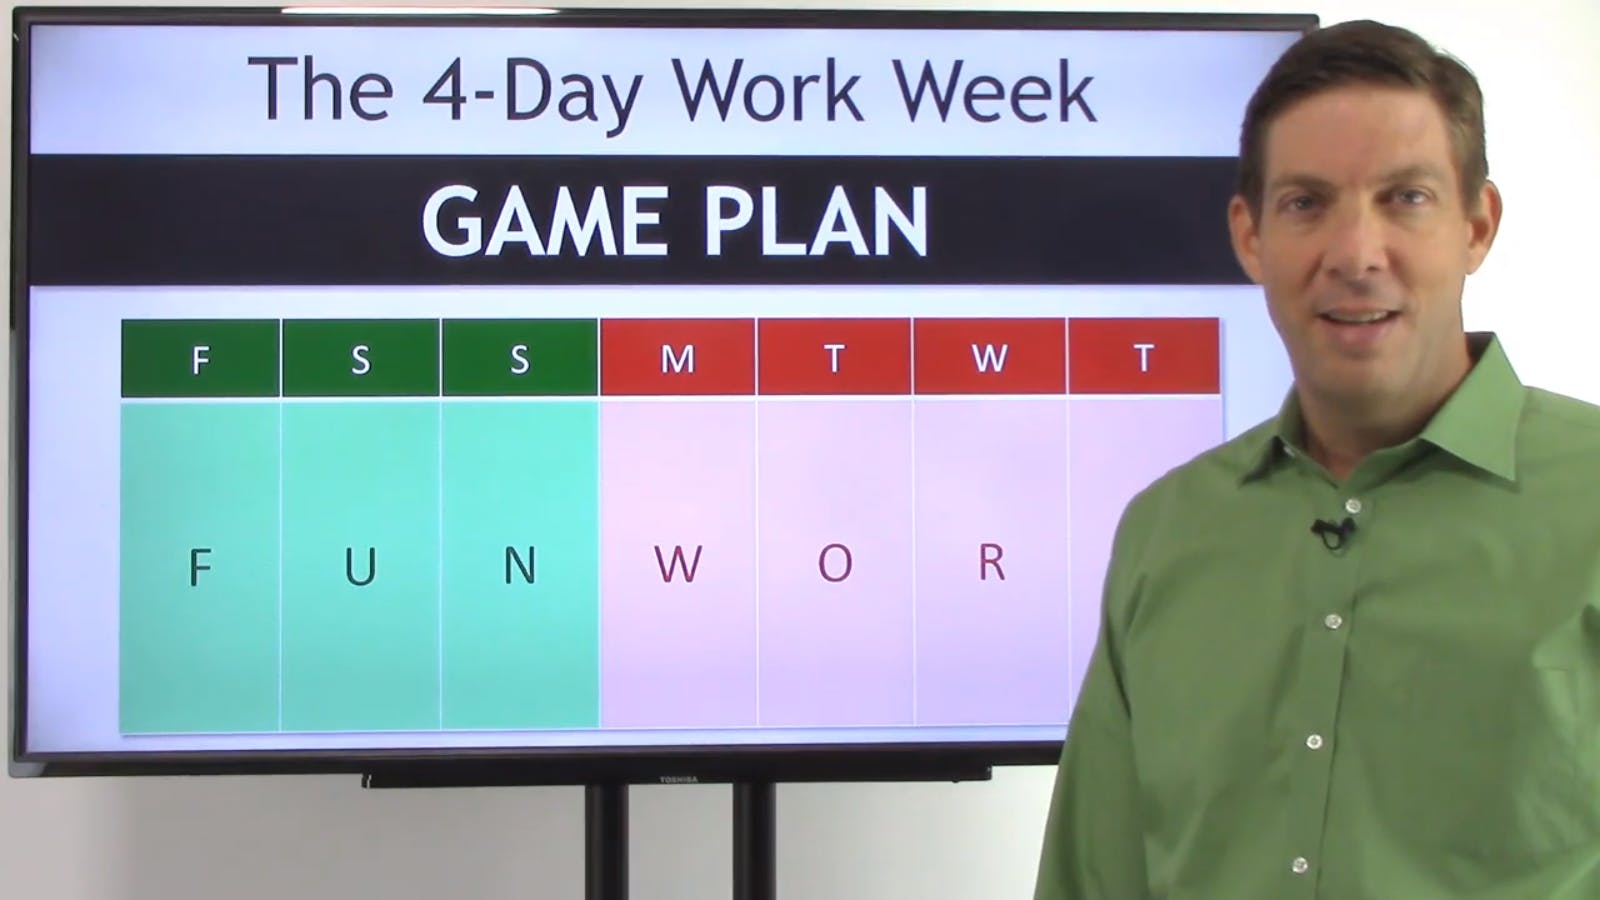 How to Create Your 4-Day Work Week Game Plan in Time for Summer (2-Hr Workshop)